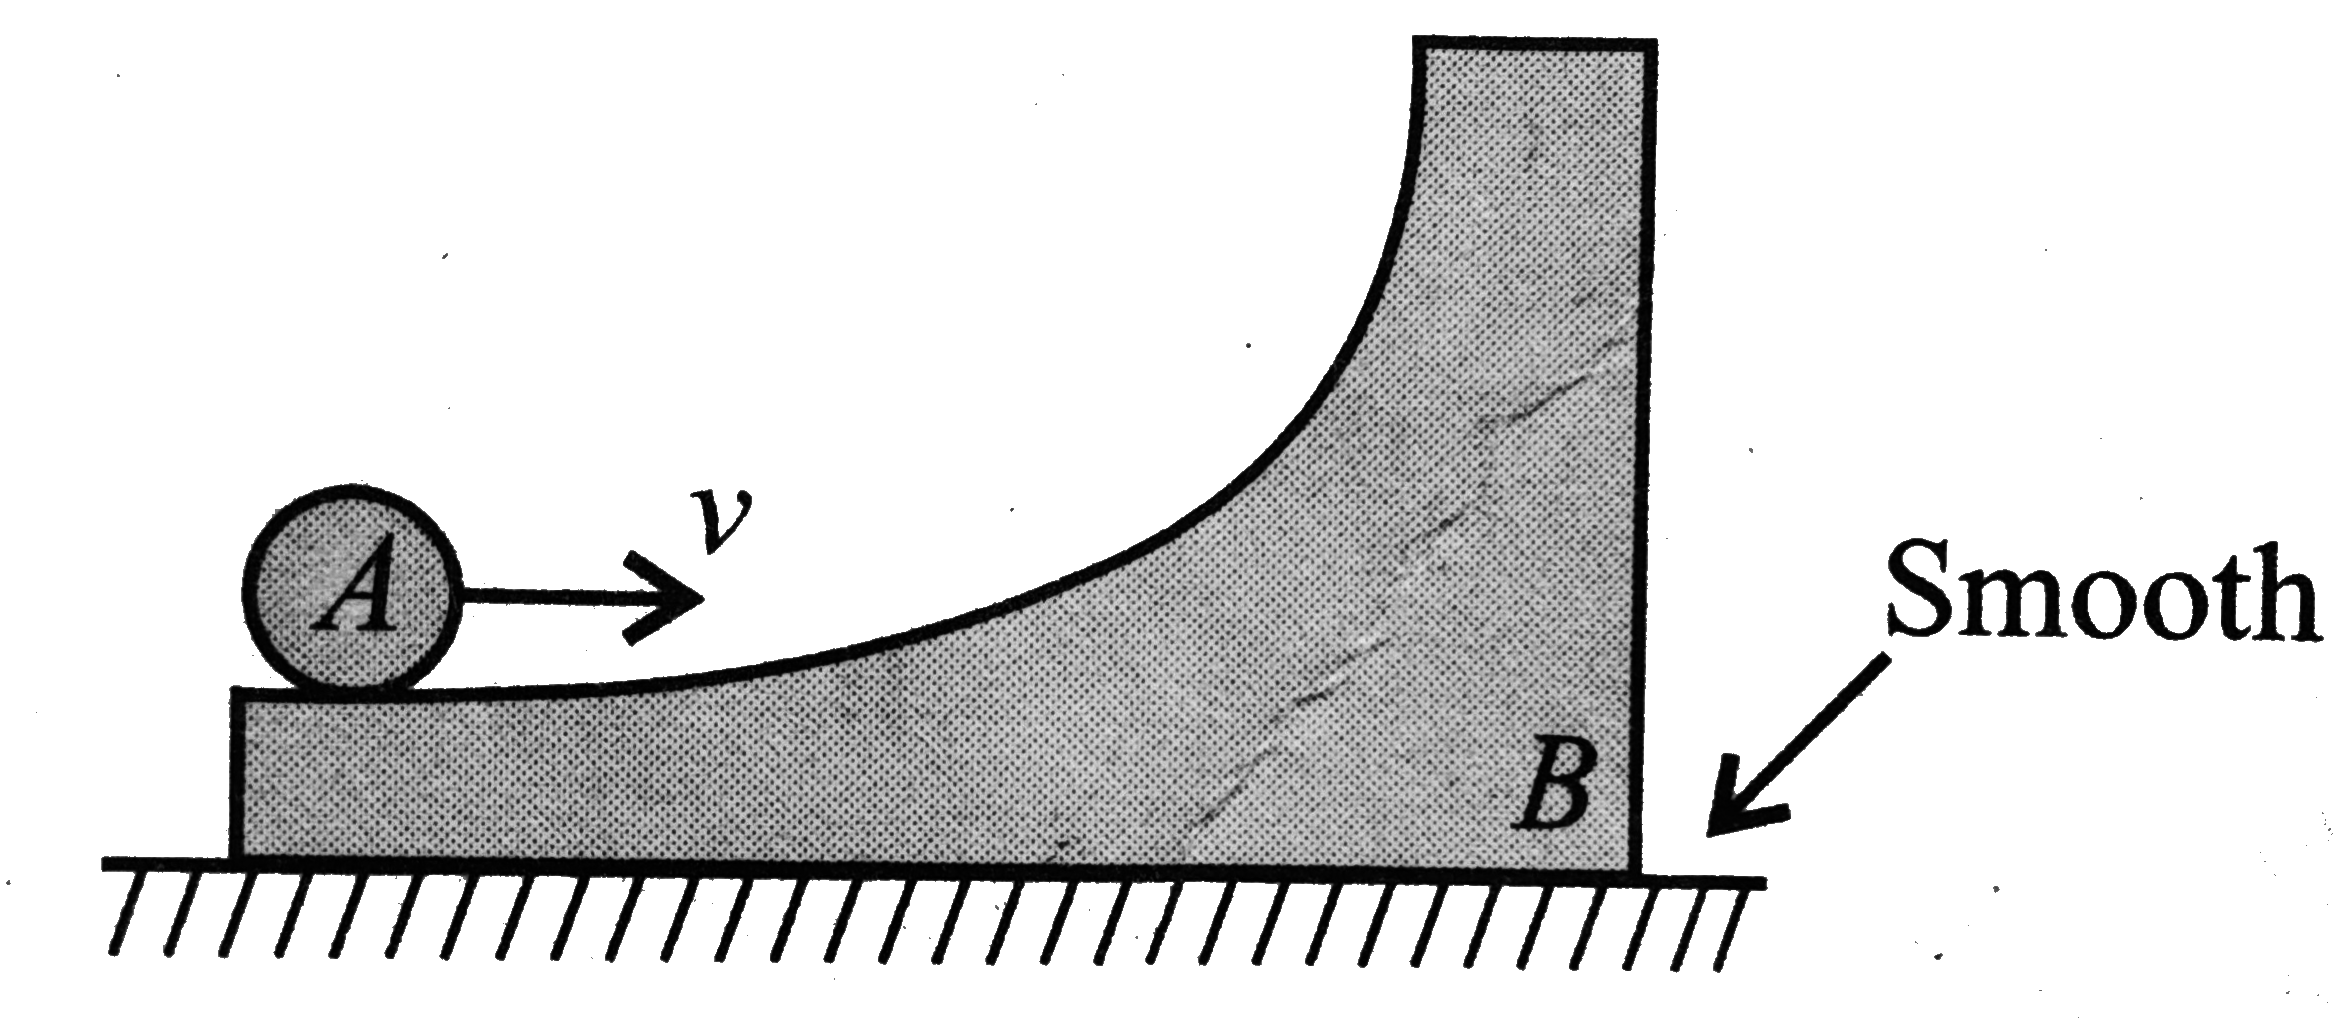 In the figure shown, a ring A is initially rolling without sliding with a velocity 1, on the horizontal surface of the body B (of same mass as A). All surfaces arc smooth. B has no initial velocity. What will be the maximum height reached by A on B?